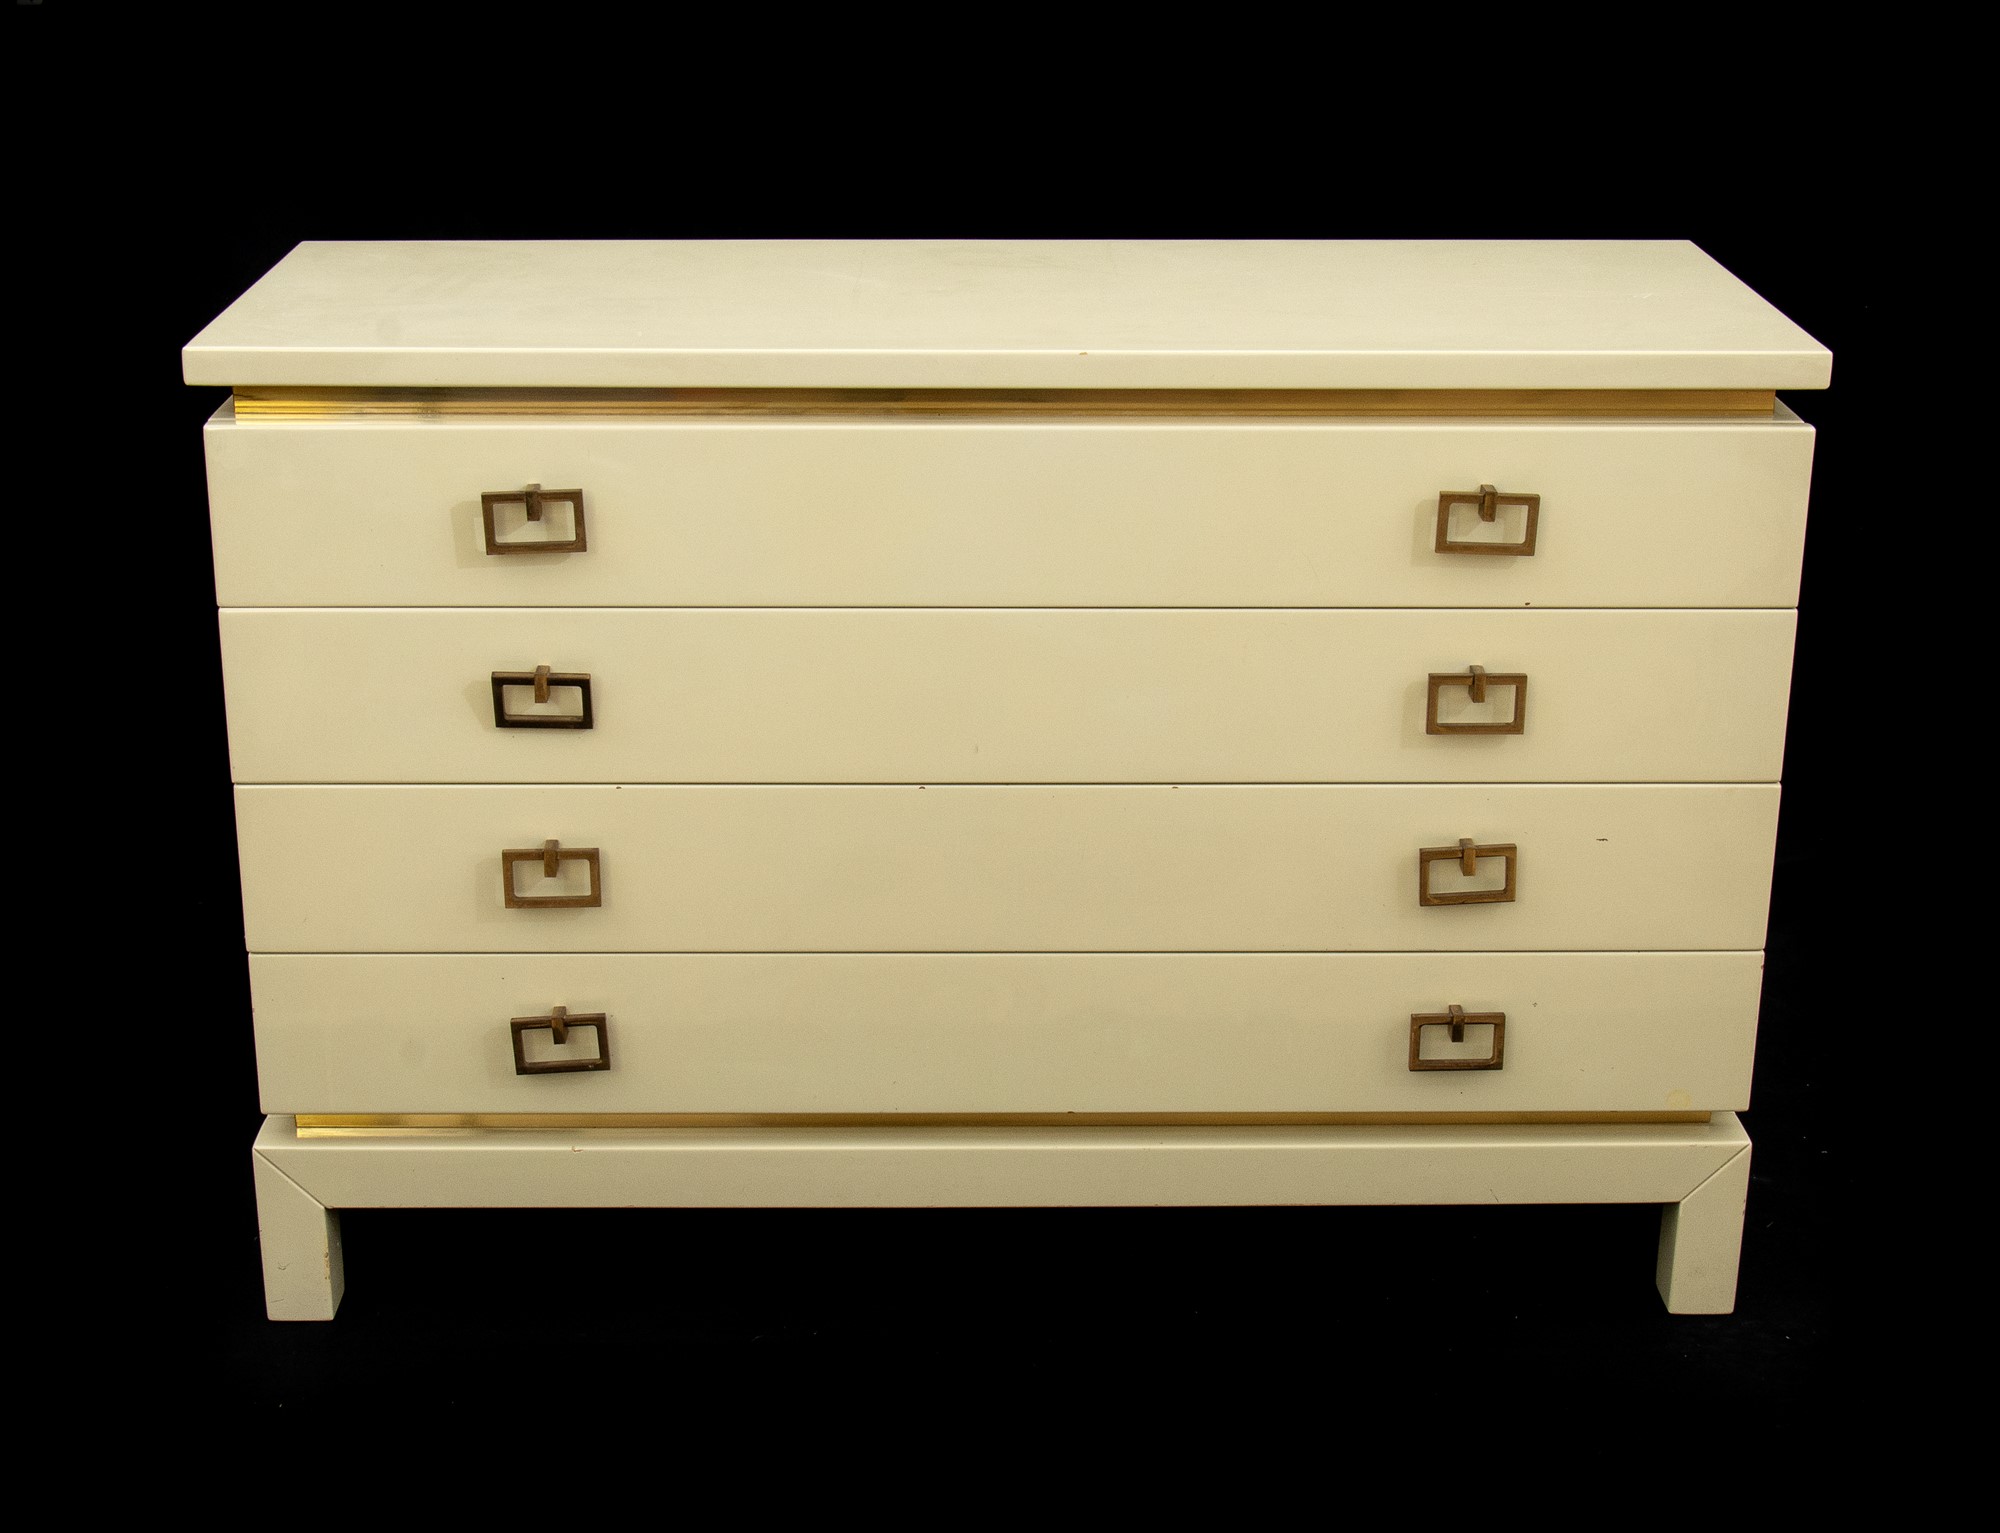 Pair of lacquered wooden drawers with four drawers on the front - Image 5 of 15